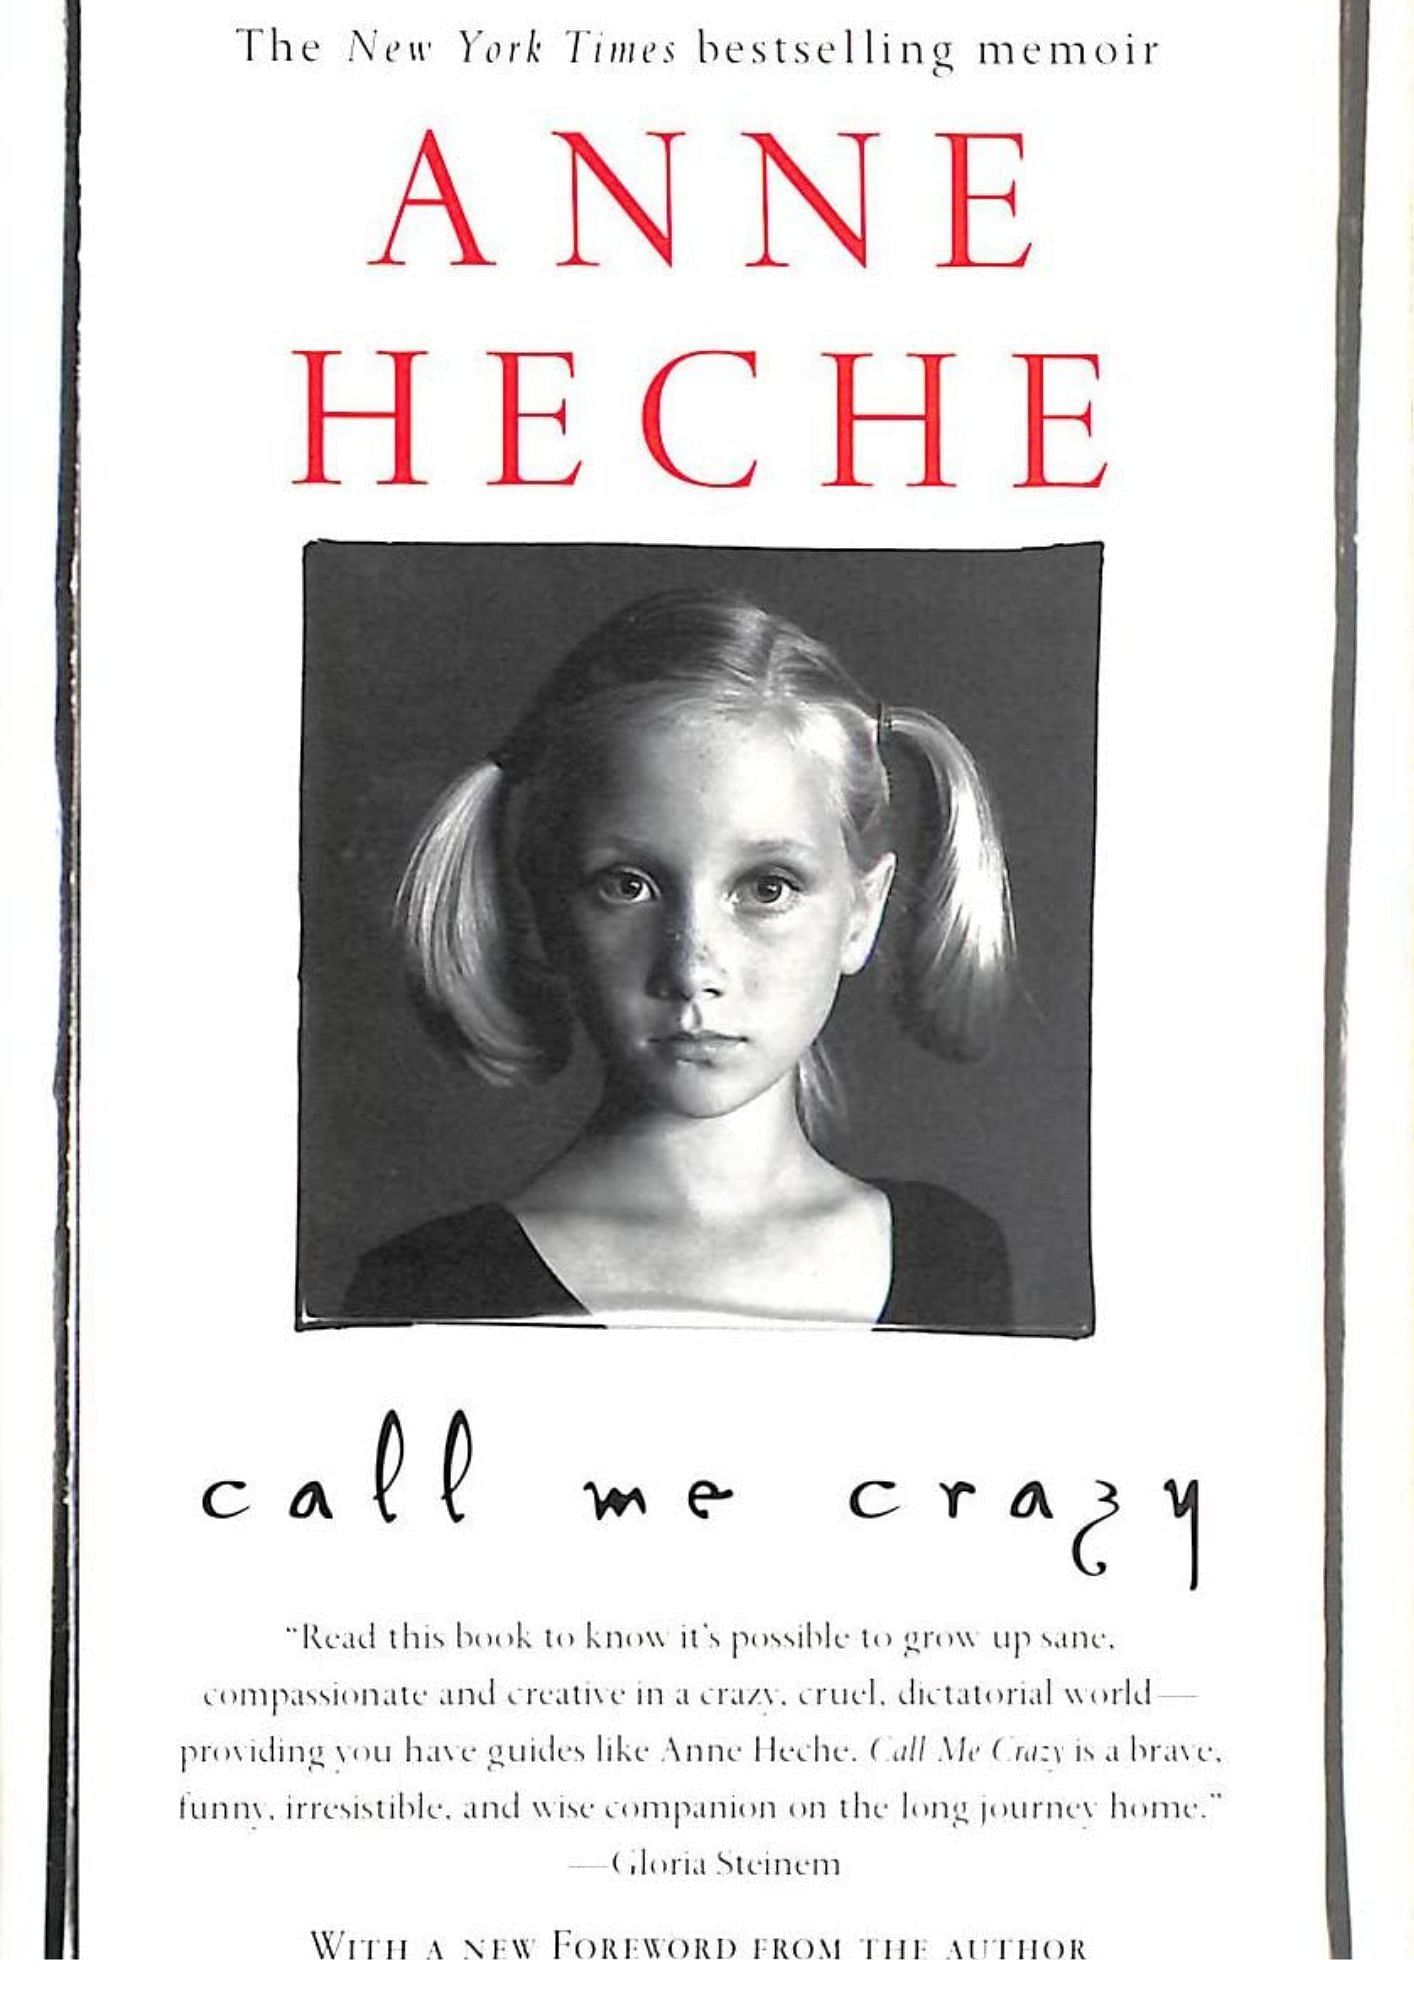 Call Me Crazy by Anne Heche (Image via Amazon)